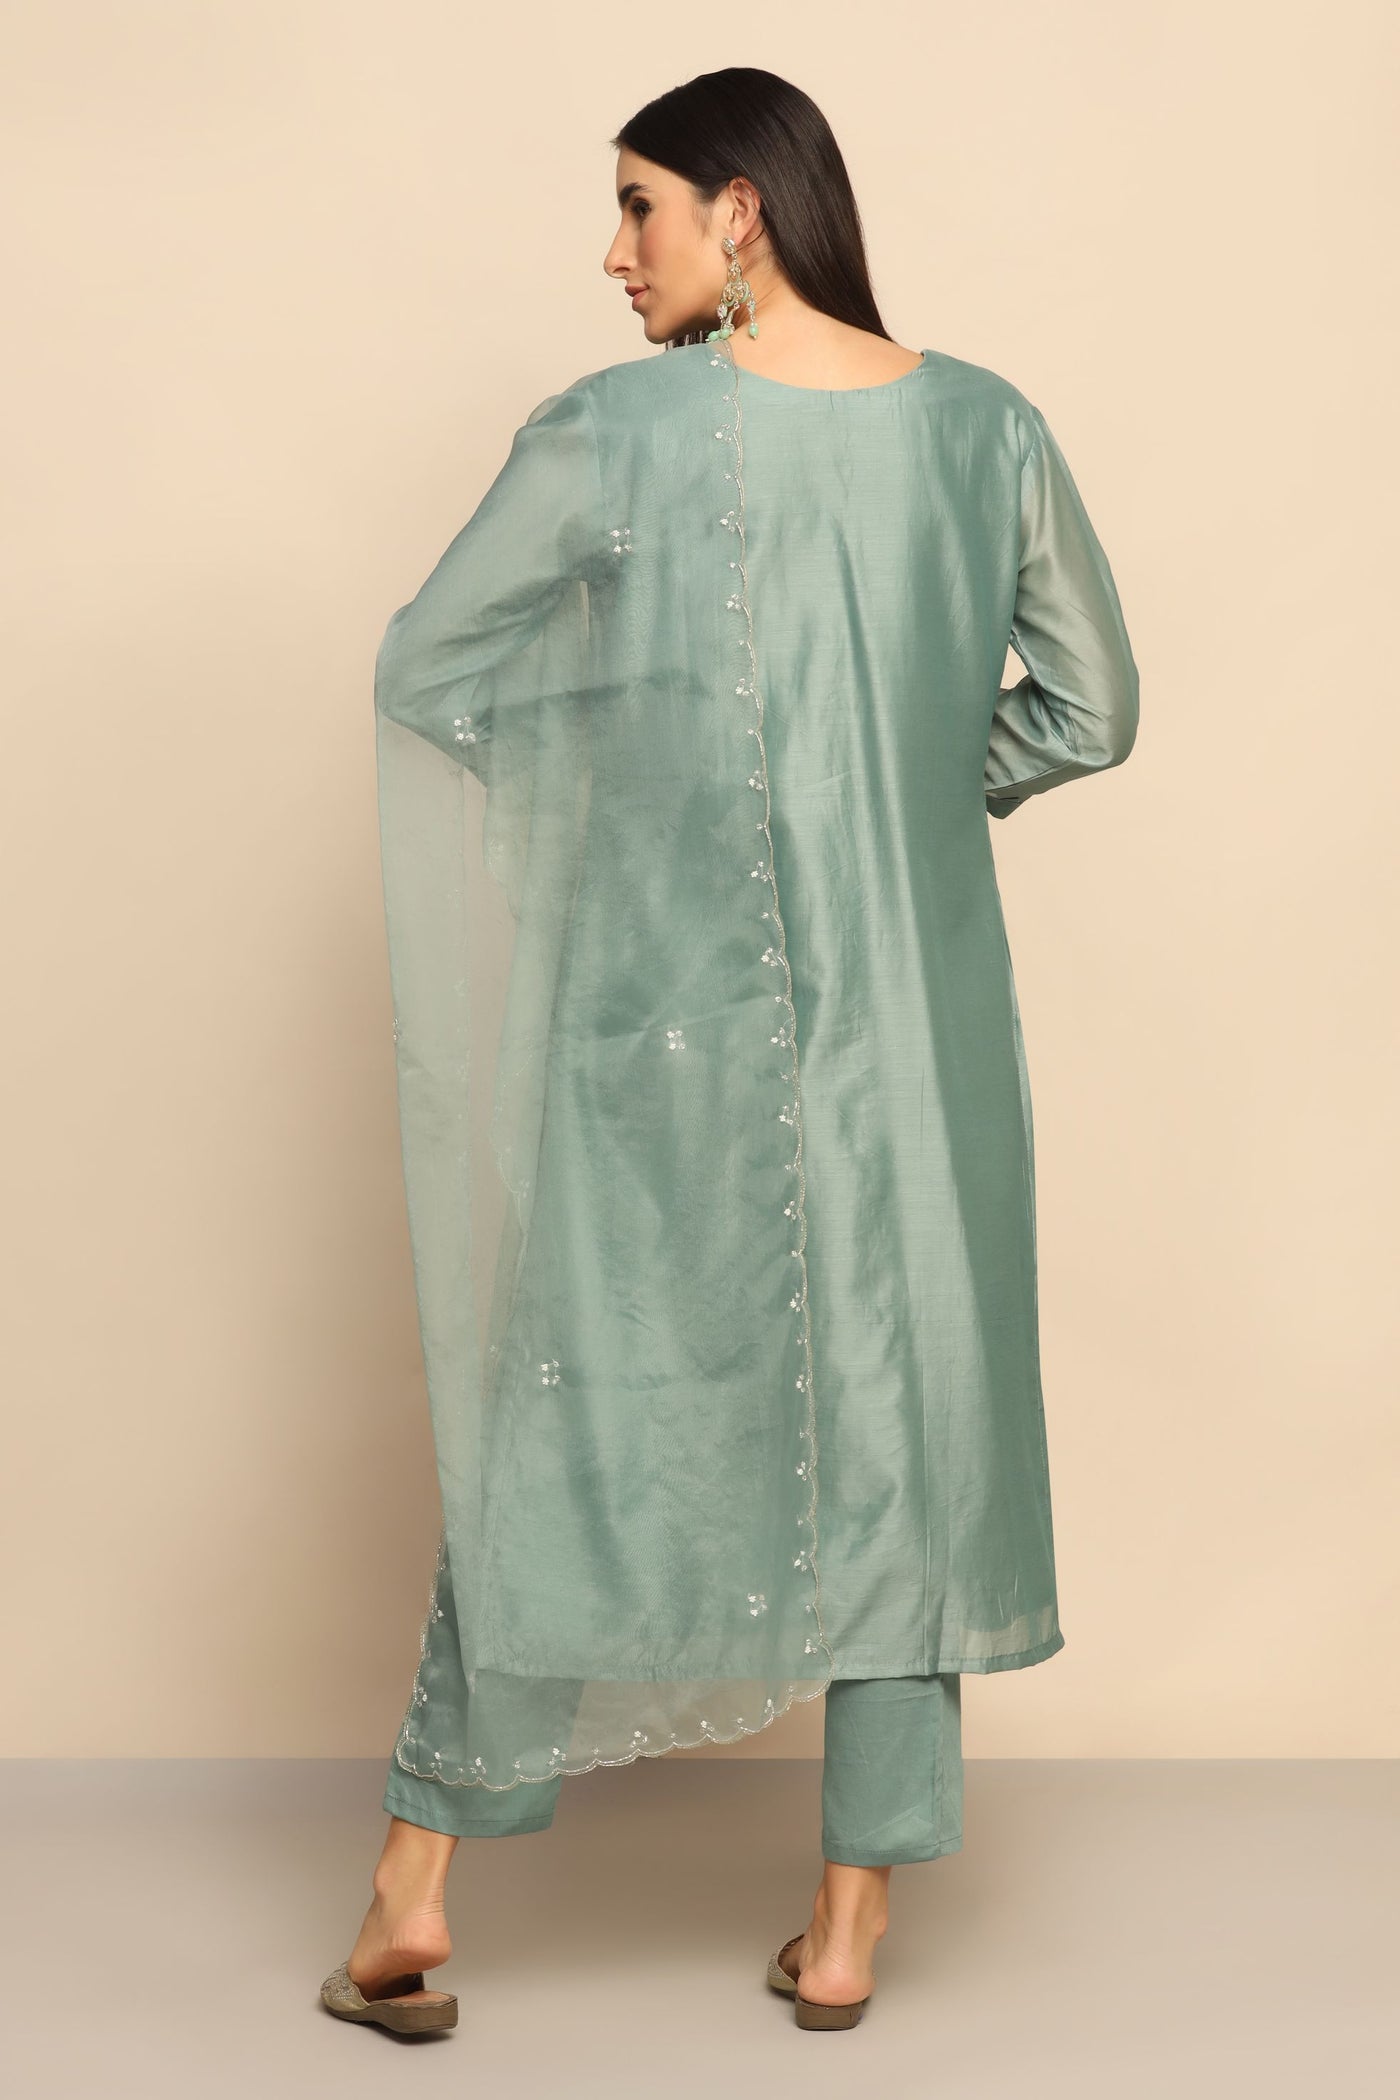 Elegant Mint Green Suit with Beads and Cut Dana